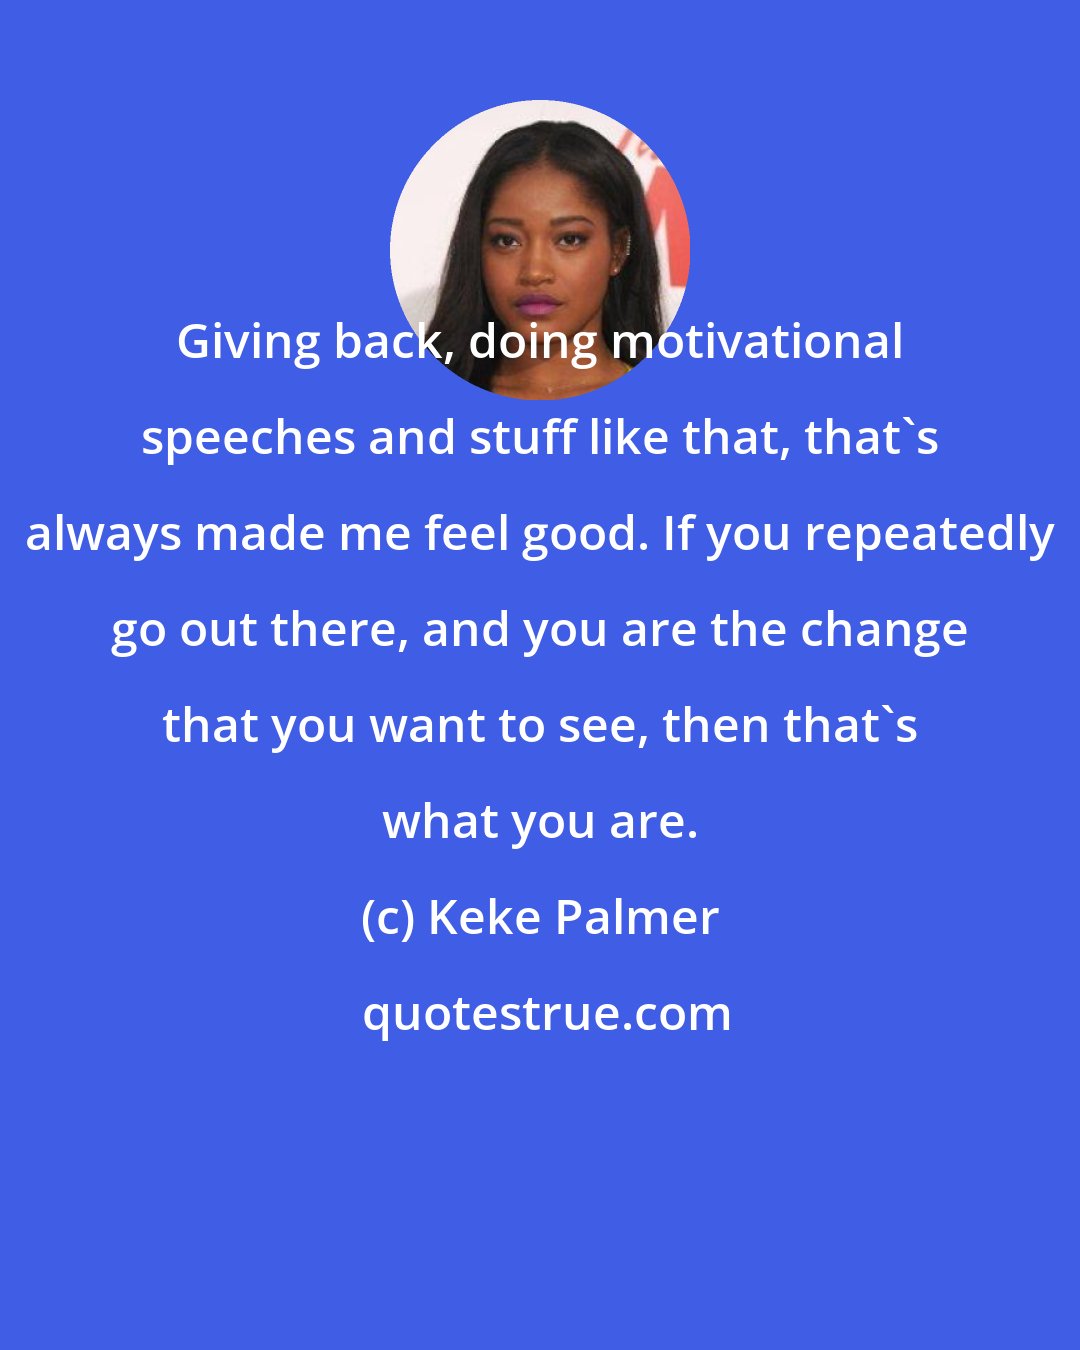 Keke Palmer: Giving back, doing motivational speeches and stuff like that, that's always made me feel good. If you repeatedly go out there, and you are the change that you want to see, then that's what you are.